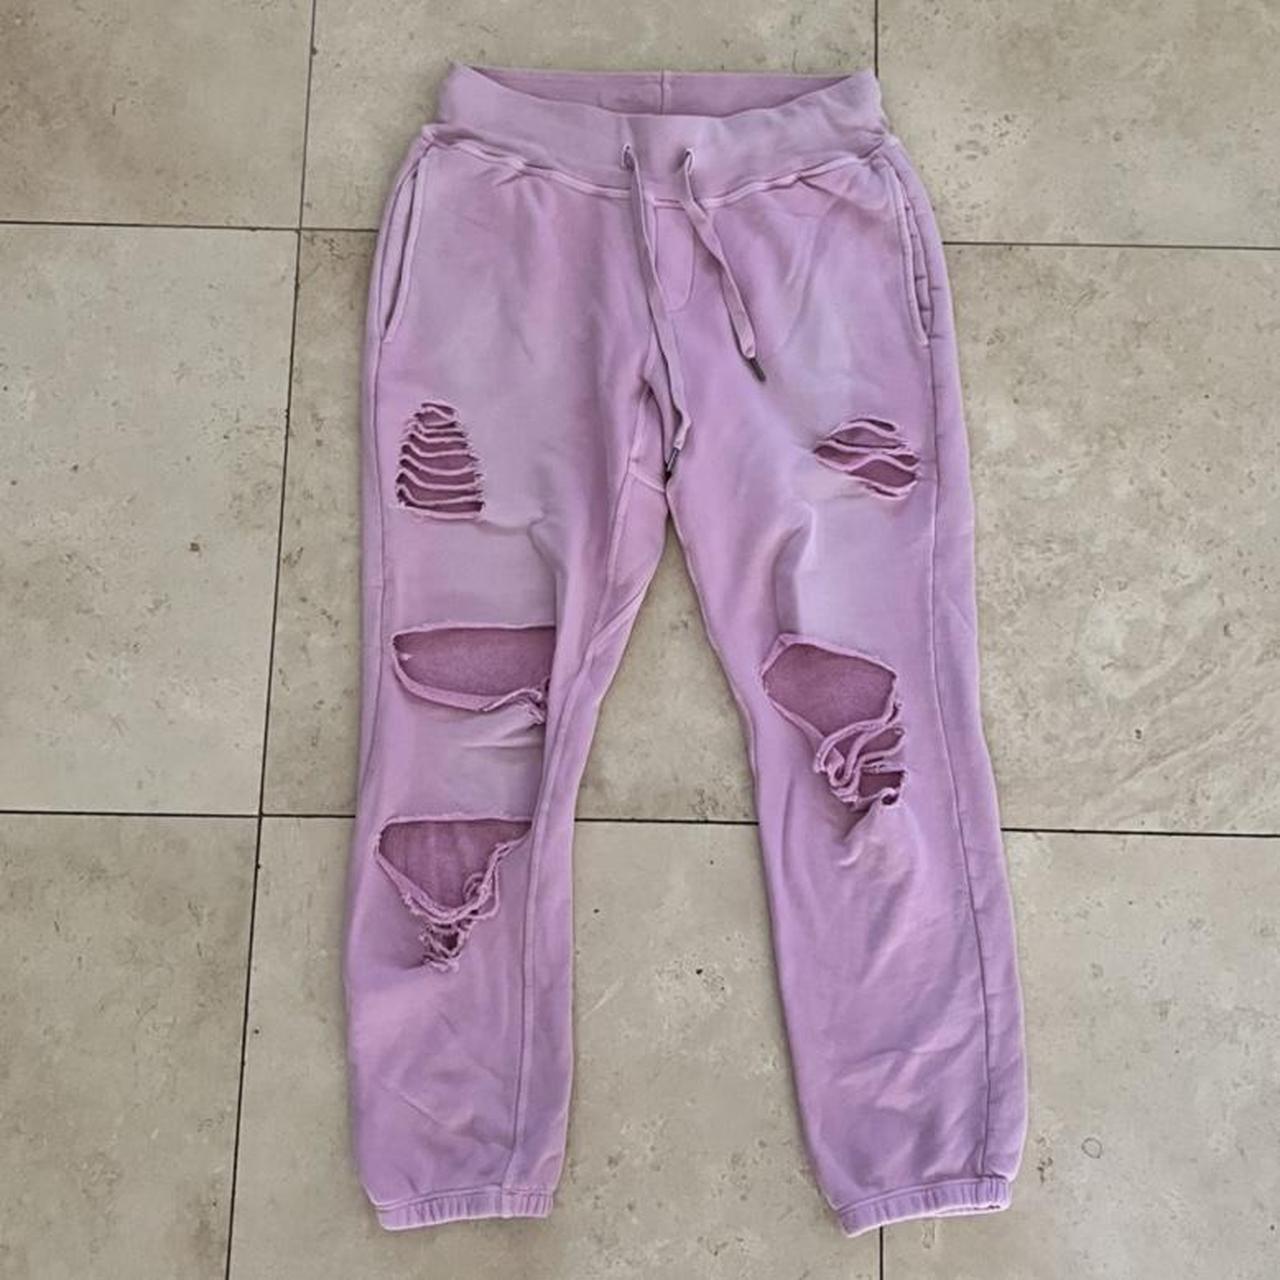 Distressed Joggers - Pink